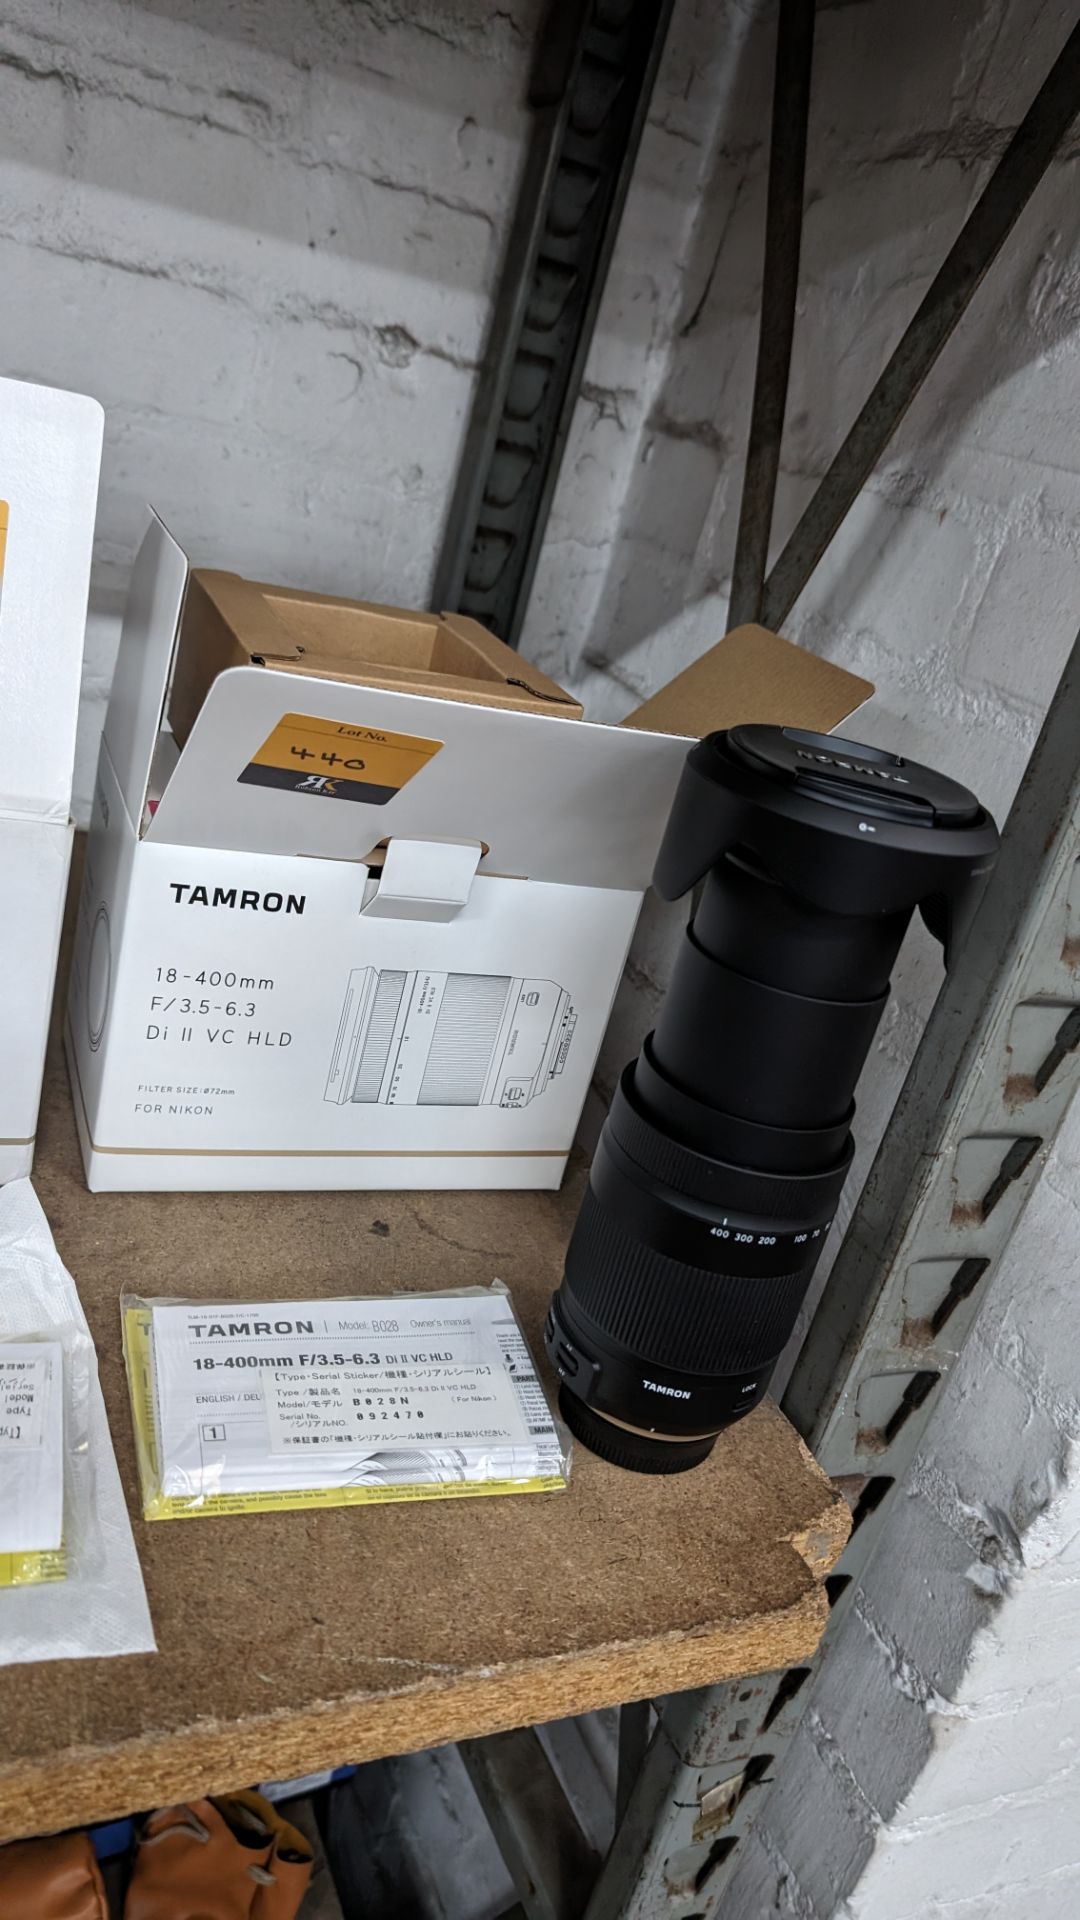 Tamron 18-400mm lens, f/3.5-6.3, Di II VC HLD. Filter size 72mm. For Nikon